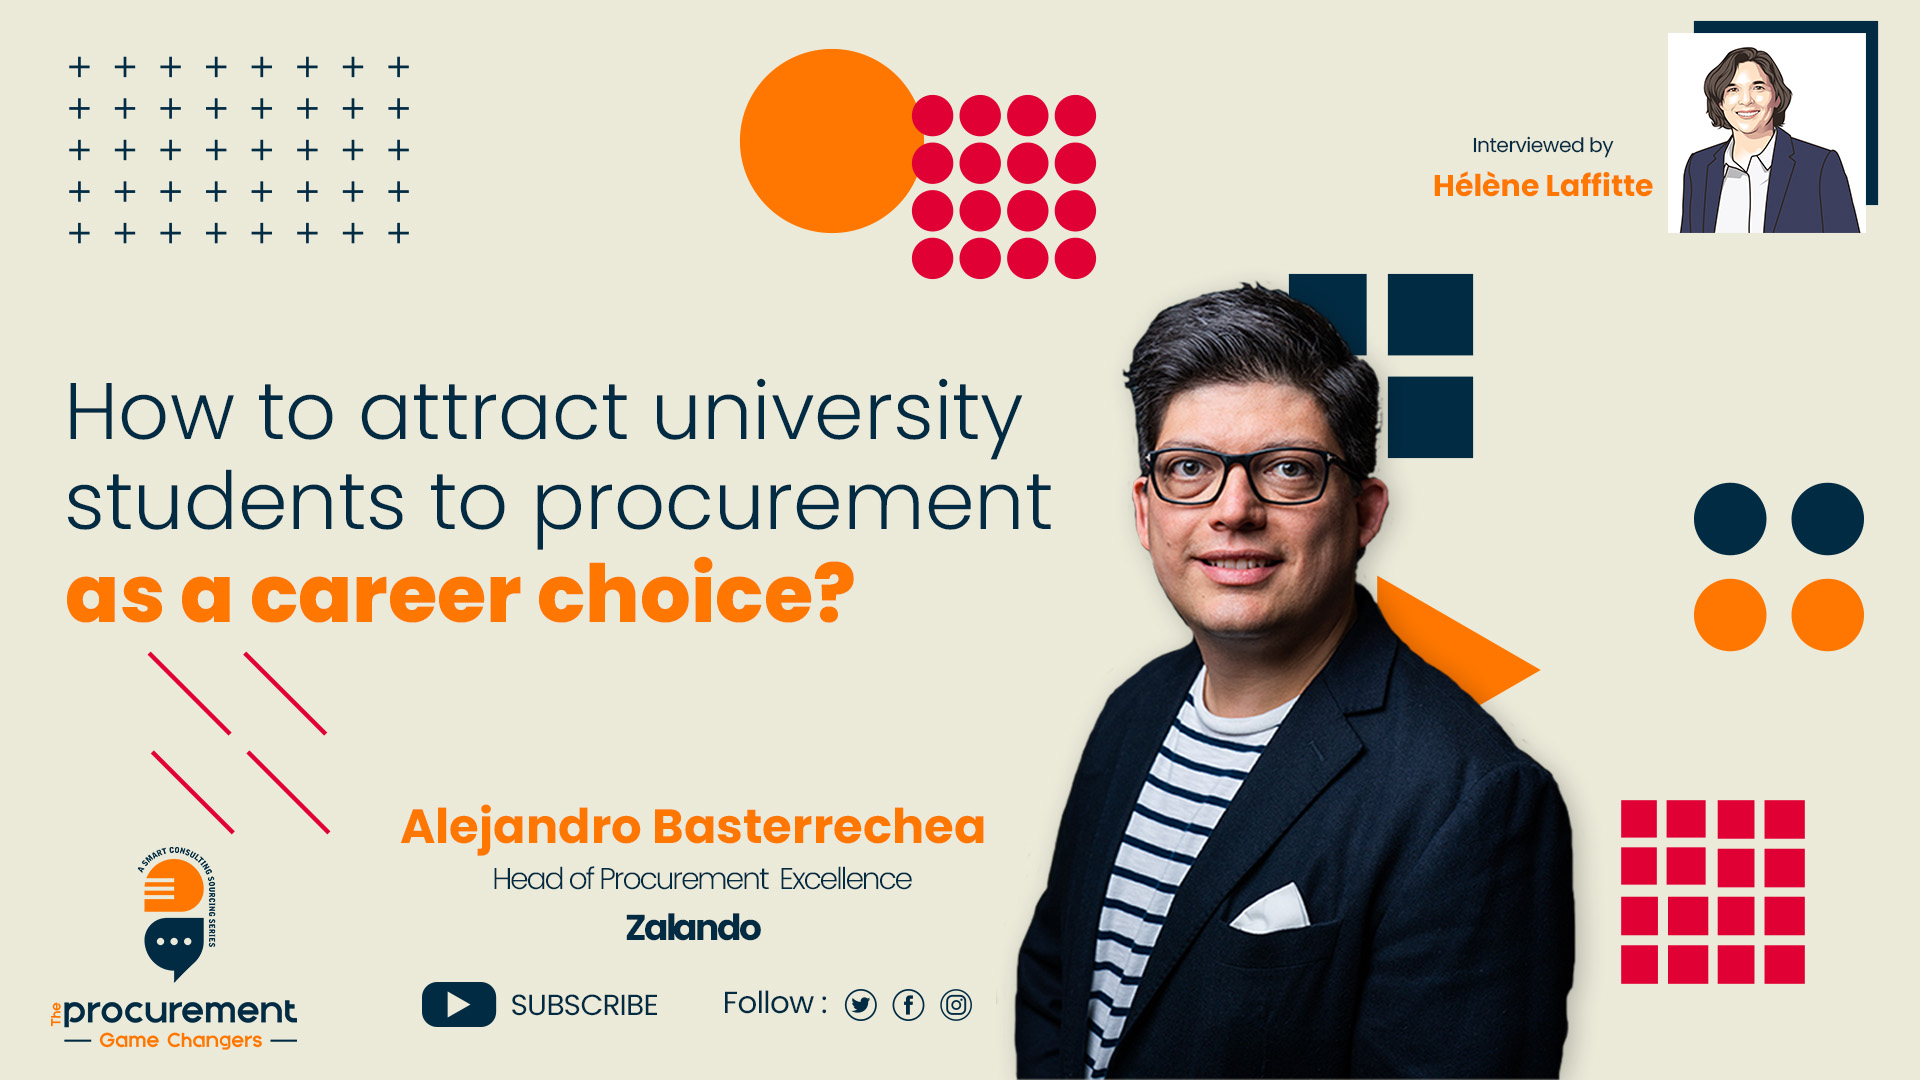 How to attract university students to procurement as a career choice?